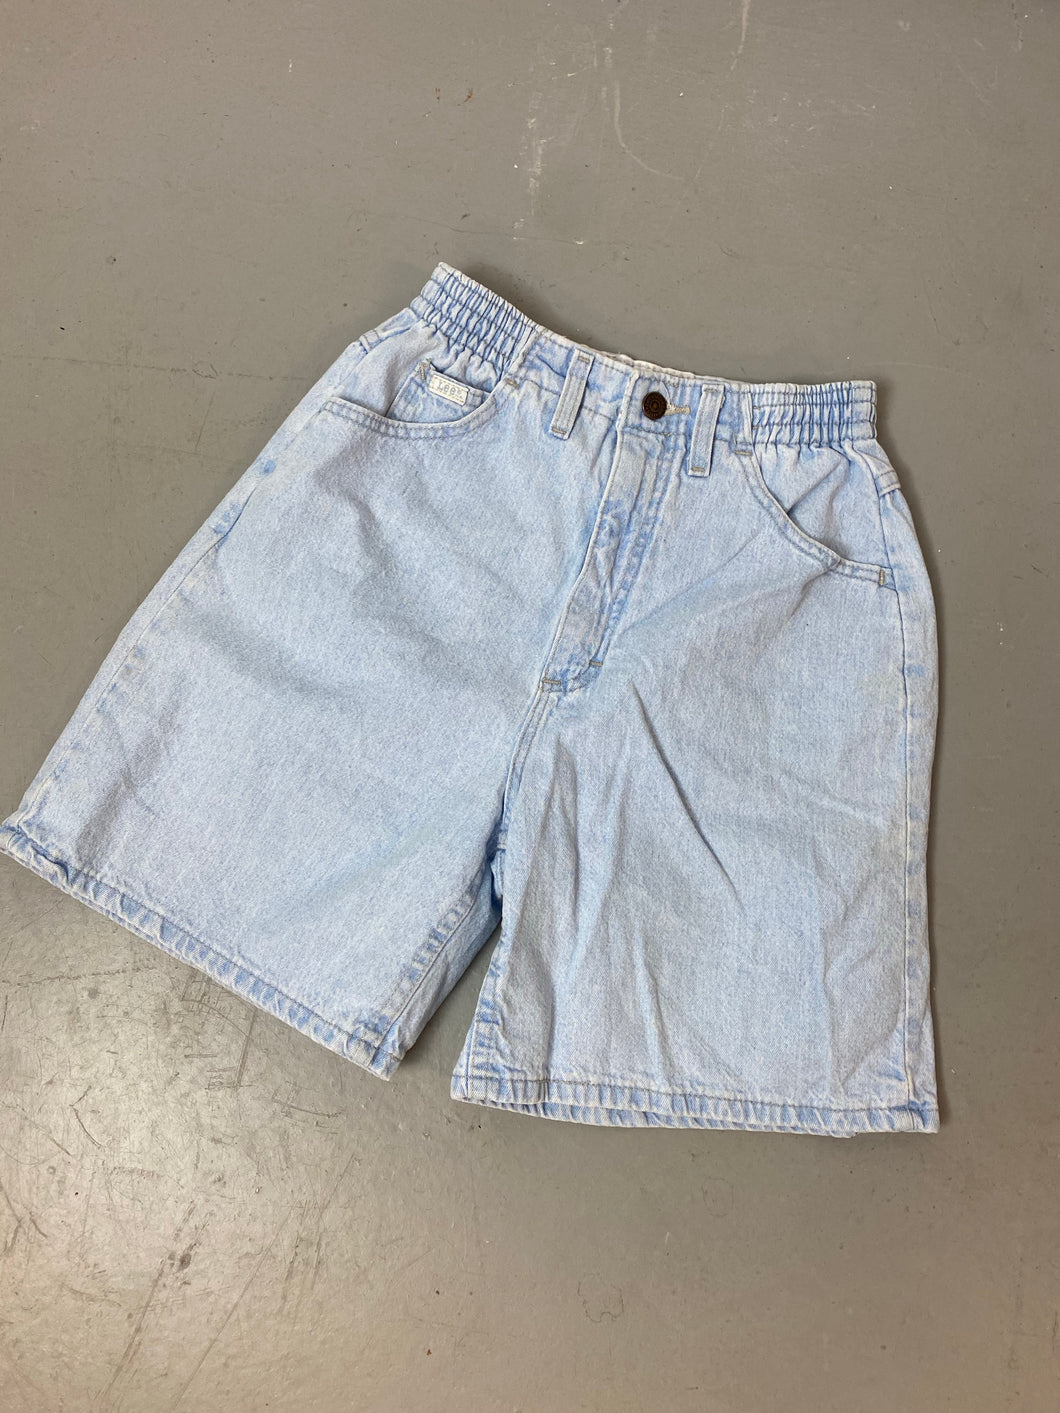 90s High Waisted Lee Denim Shorts - 24-26in